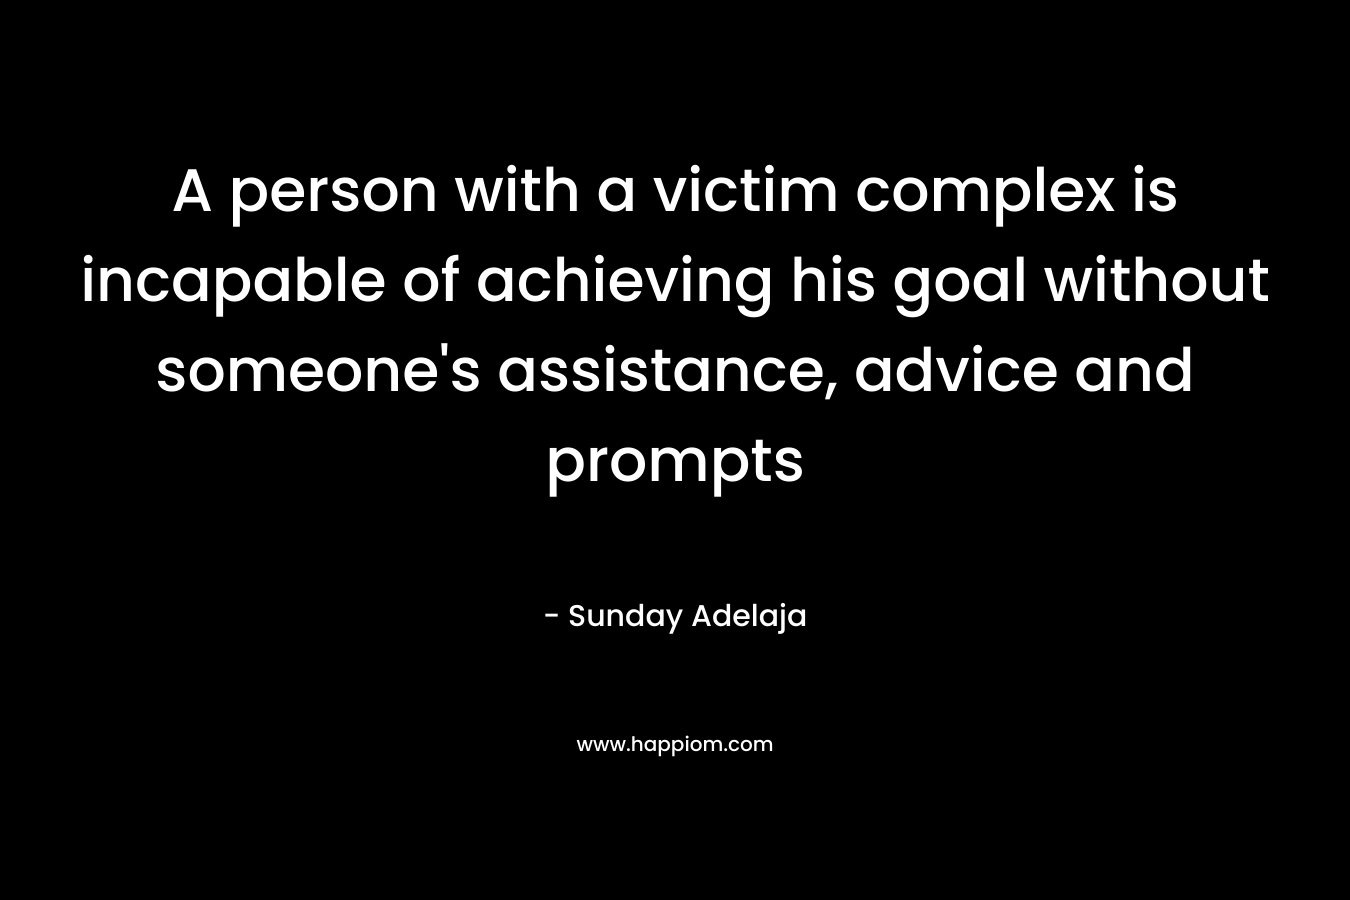 A person with a victim complex is incapable of achieving his goal without someone's assistance, advice and prompts